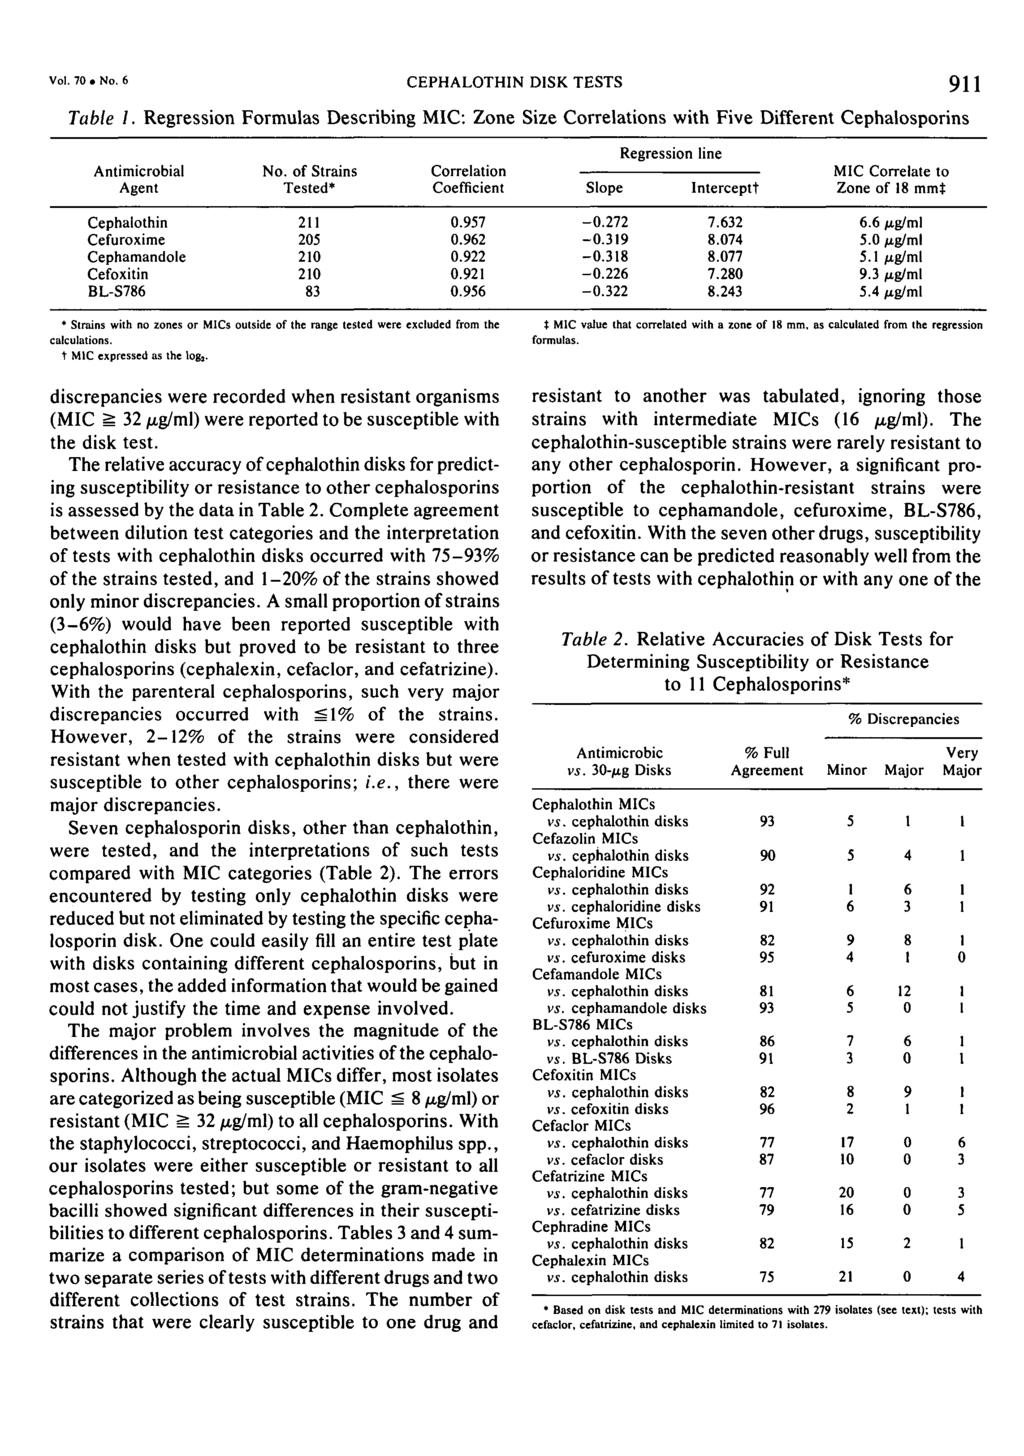 Vol.. No. 6 CEPHALOTHIN DISK TESTS 9 J J Table I. Regression Formulas Describing MIC: Zone Size Correlations with Five Different Cephalosporins Antimicrobial Agent No.